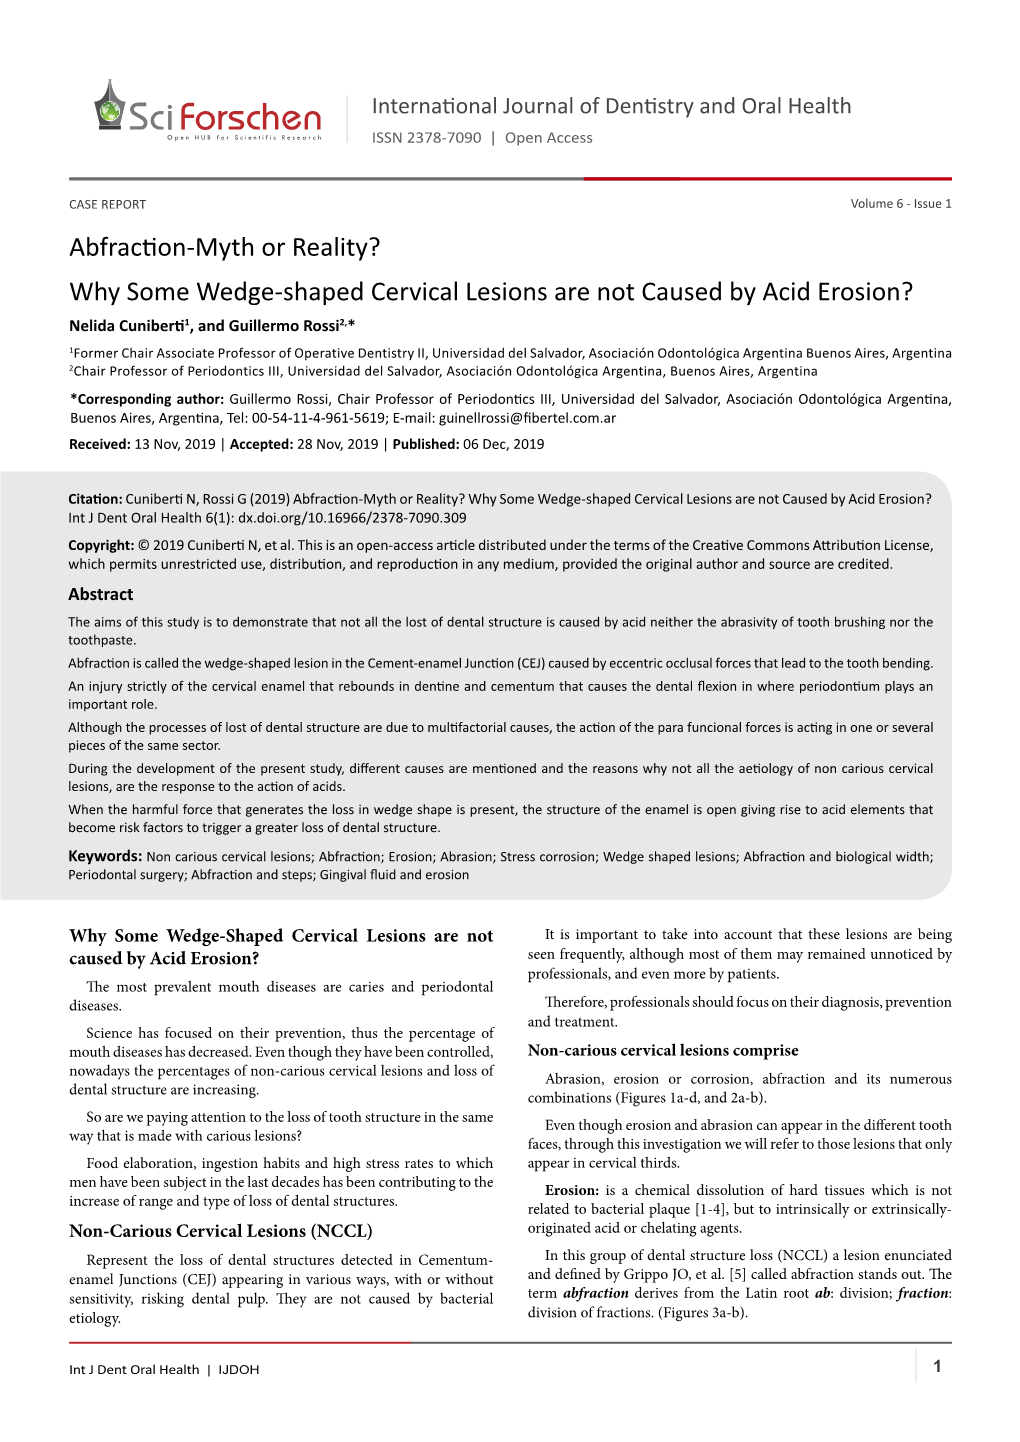 Abfraction-Myth Or Reality?Why Some Wedge-Shaped Cervical Lesions